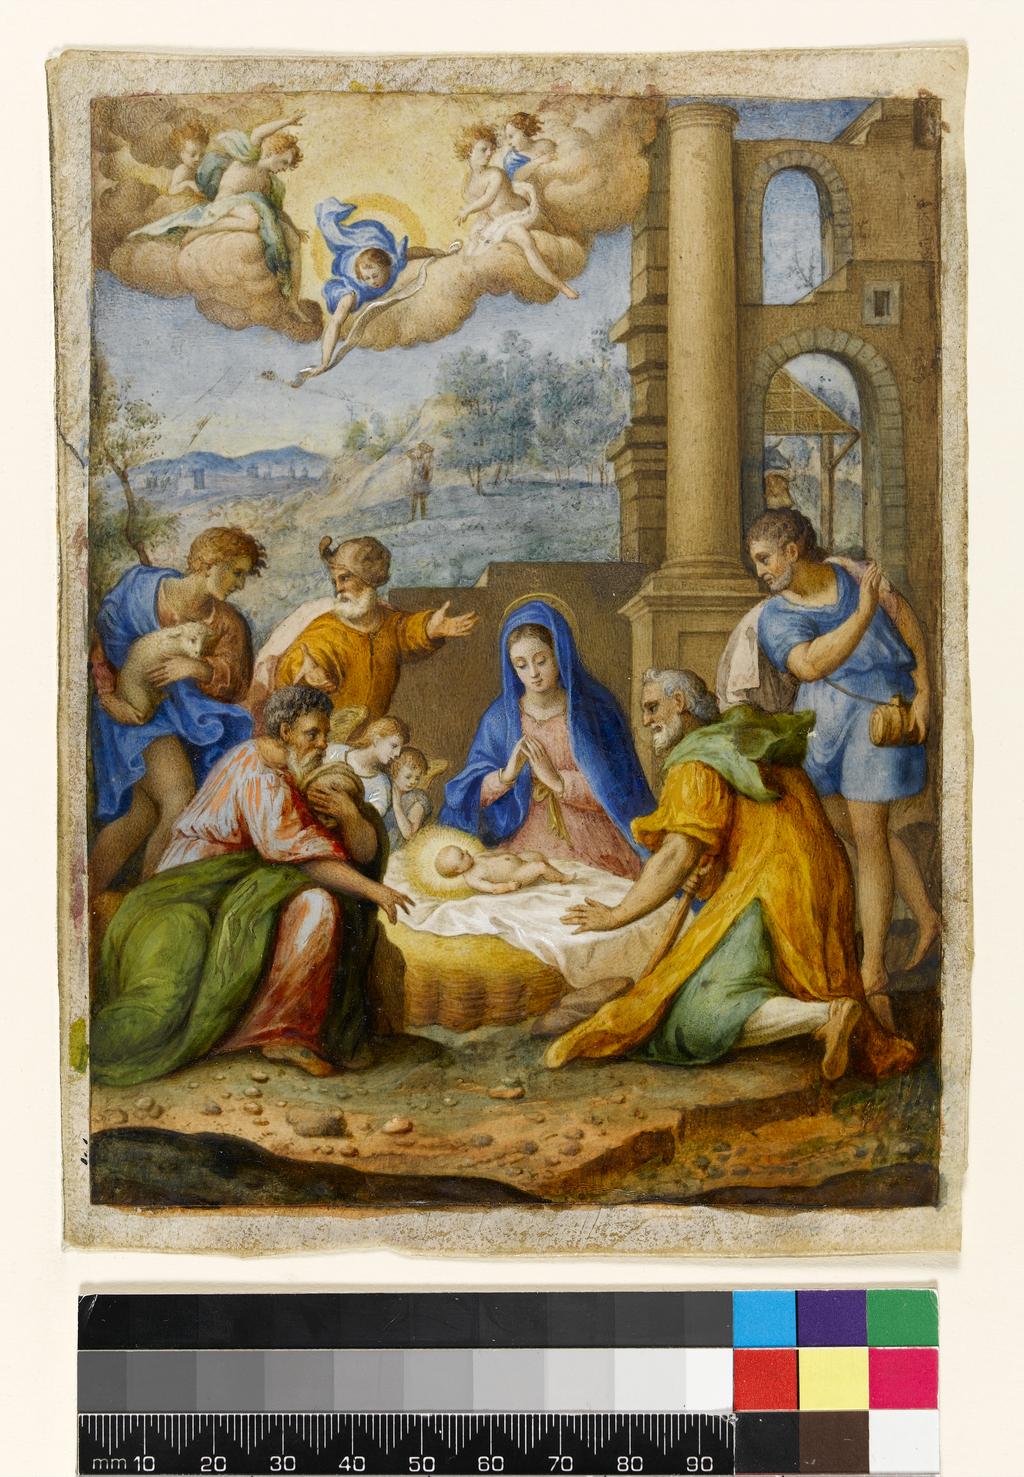 An image of Title/s: The Adoration of the Shepherds Maker/s: ZUCCARI, Taddeo, afterTechnique Description: bodycolour, point of the brush, with gold highlights on paper? pasted on to vellum Dimensions: height: 160 mm, width: 122 mm